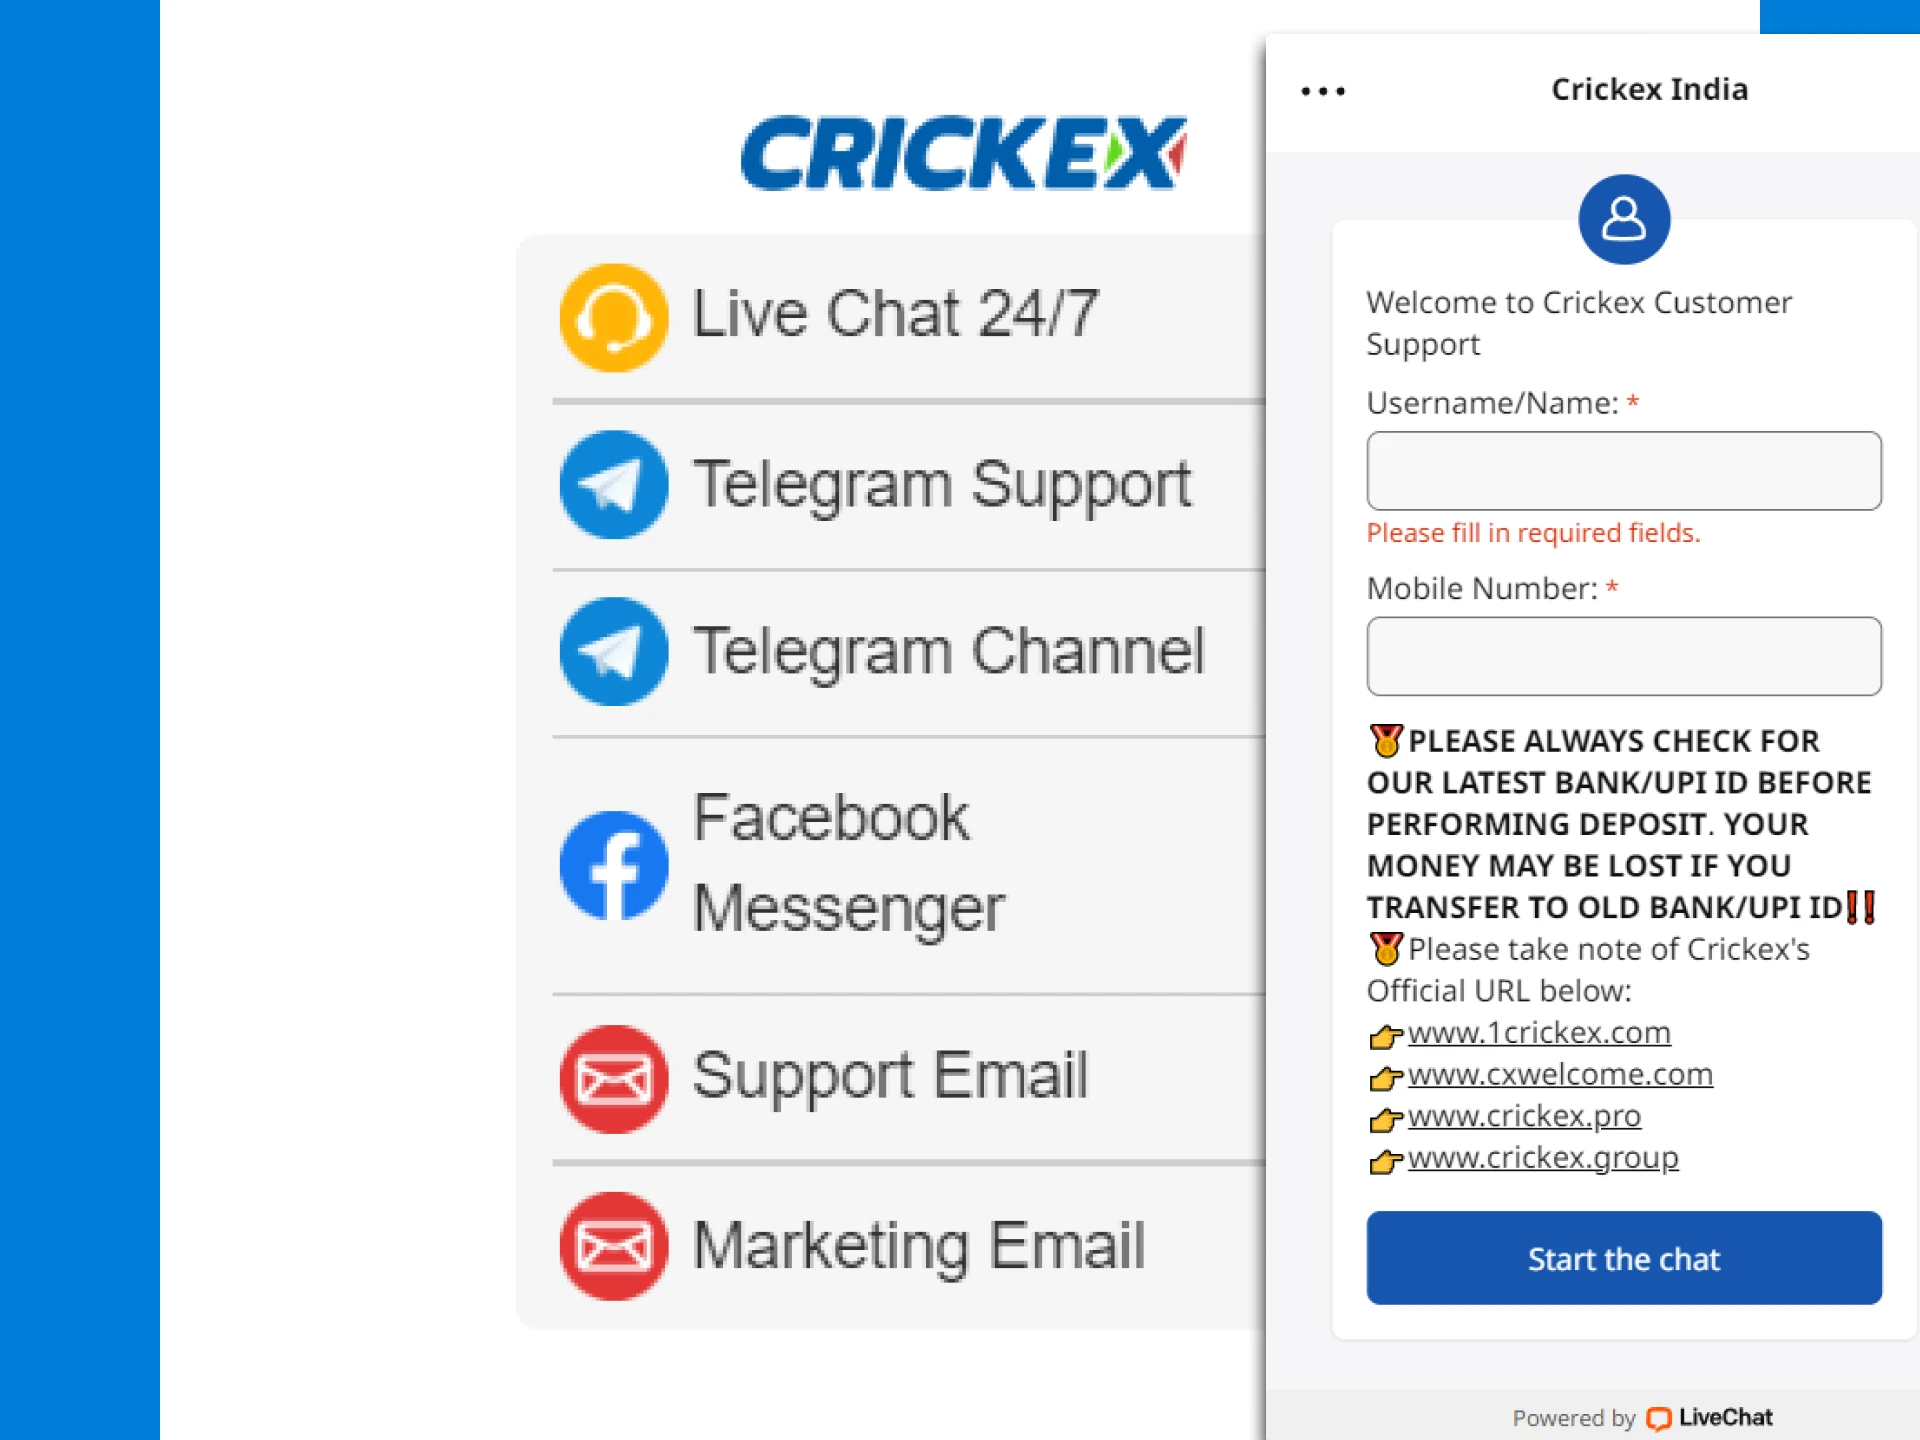 Find out how you can contact the Crickex team.